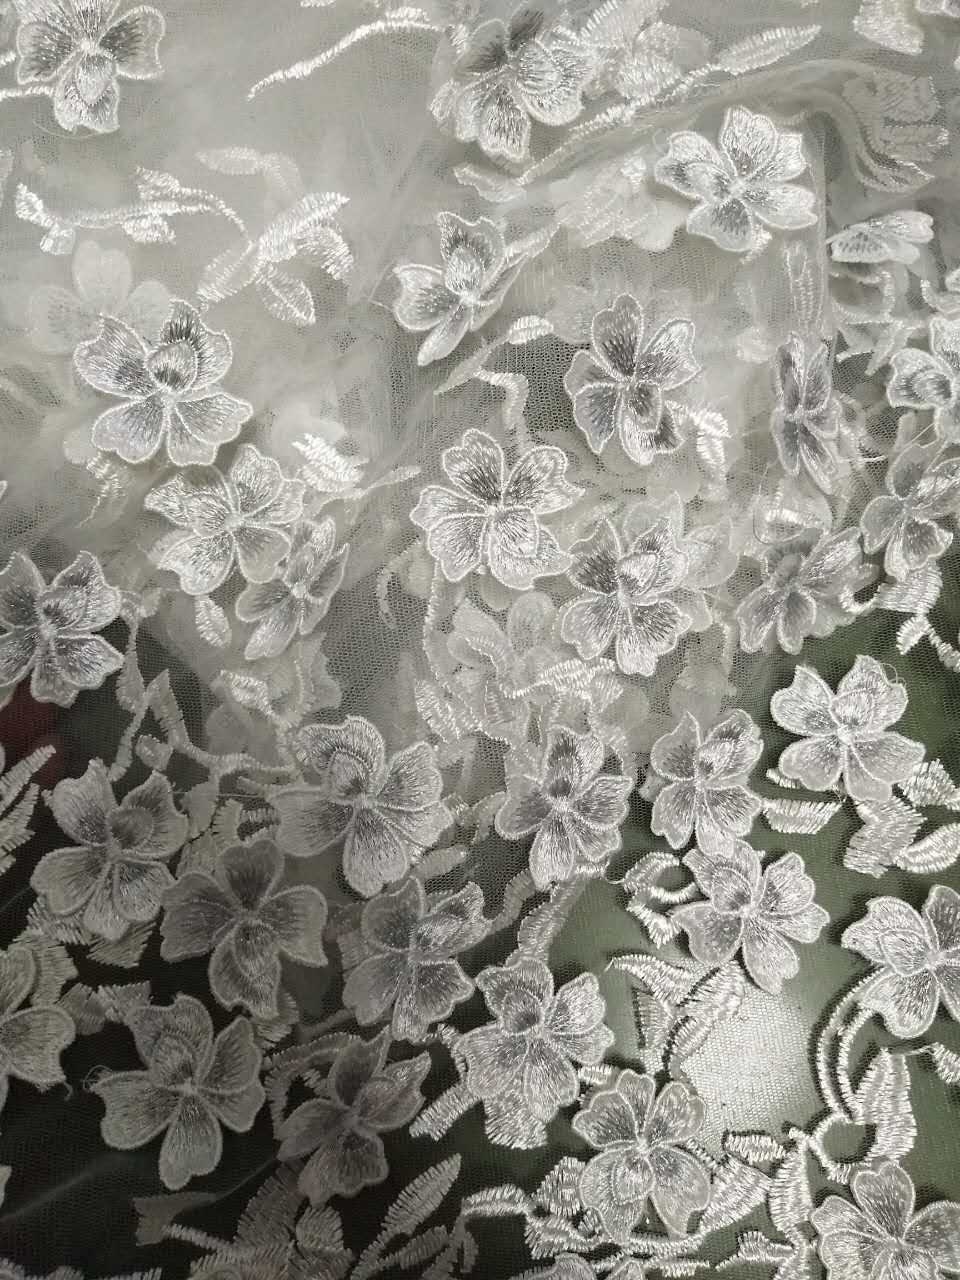 3D Flowers Lace Fabric by the Yard Ivory White Lace Fabric - Etsy